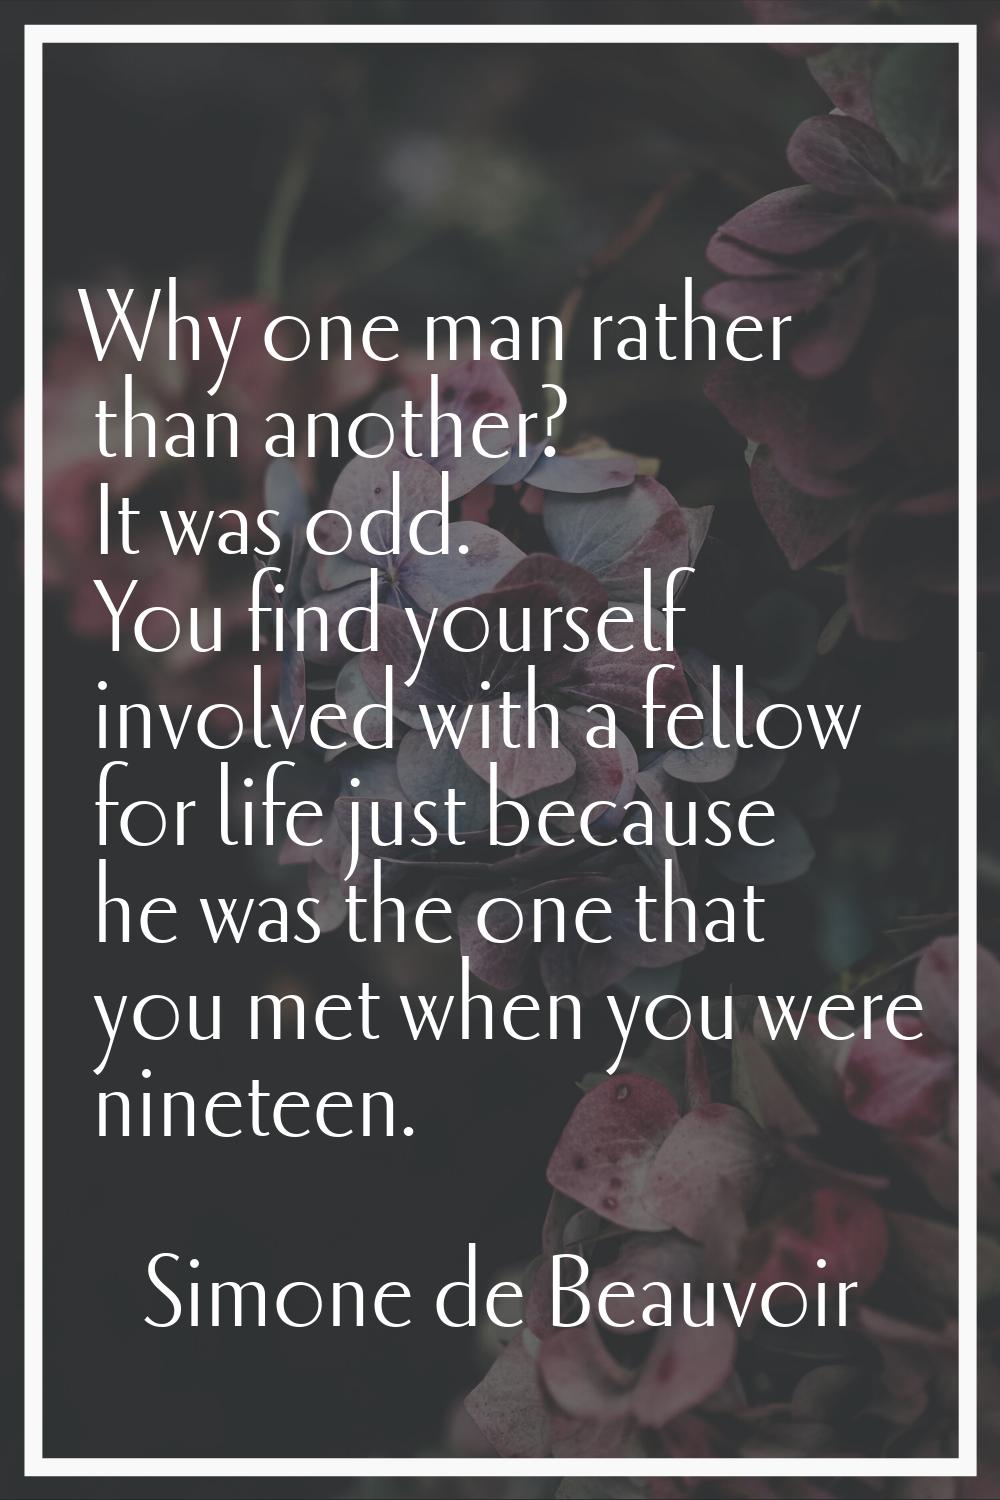 Why one man rather than another? It was odd. You find yourself involved with a fellow for life just